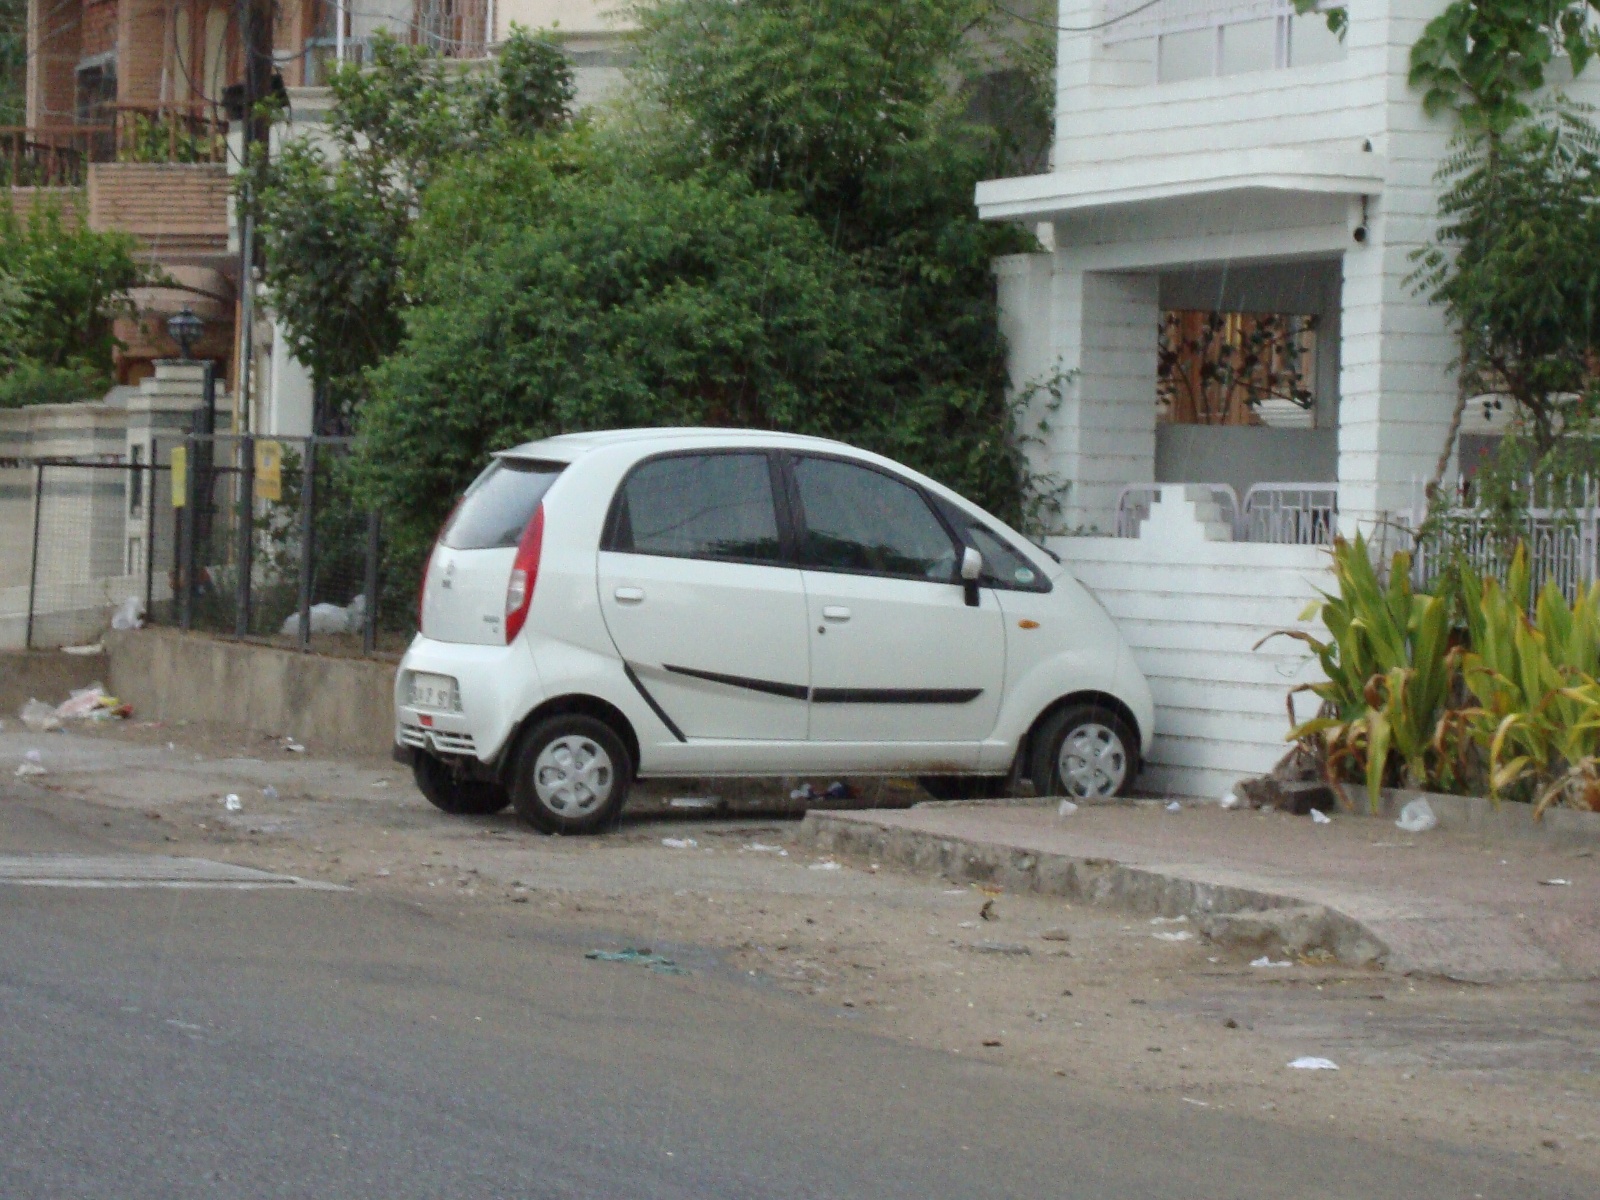 A white Tata Nano. The Nano comes in a variety of other colors, including orange.